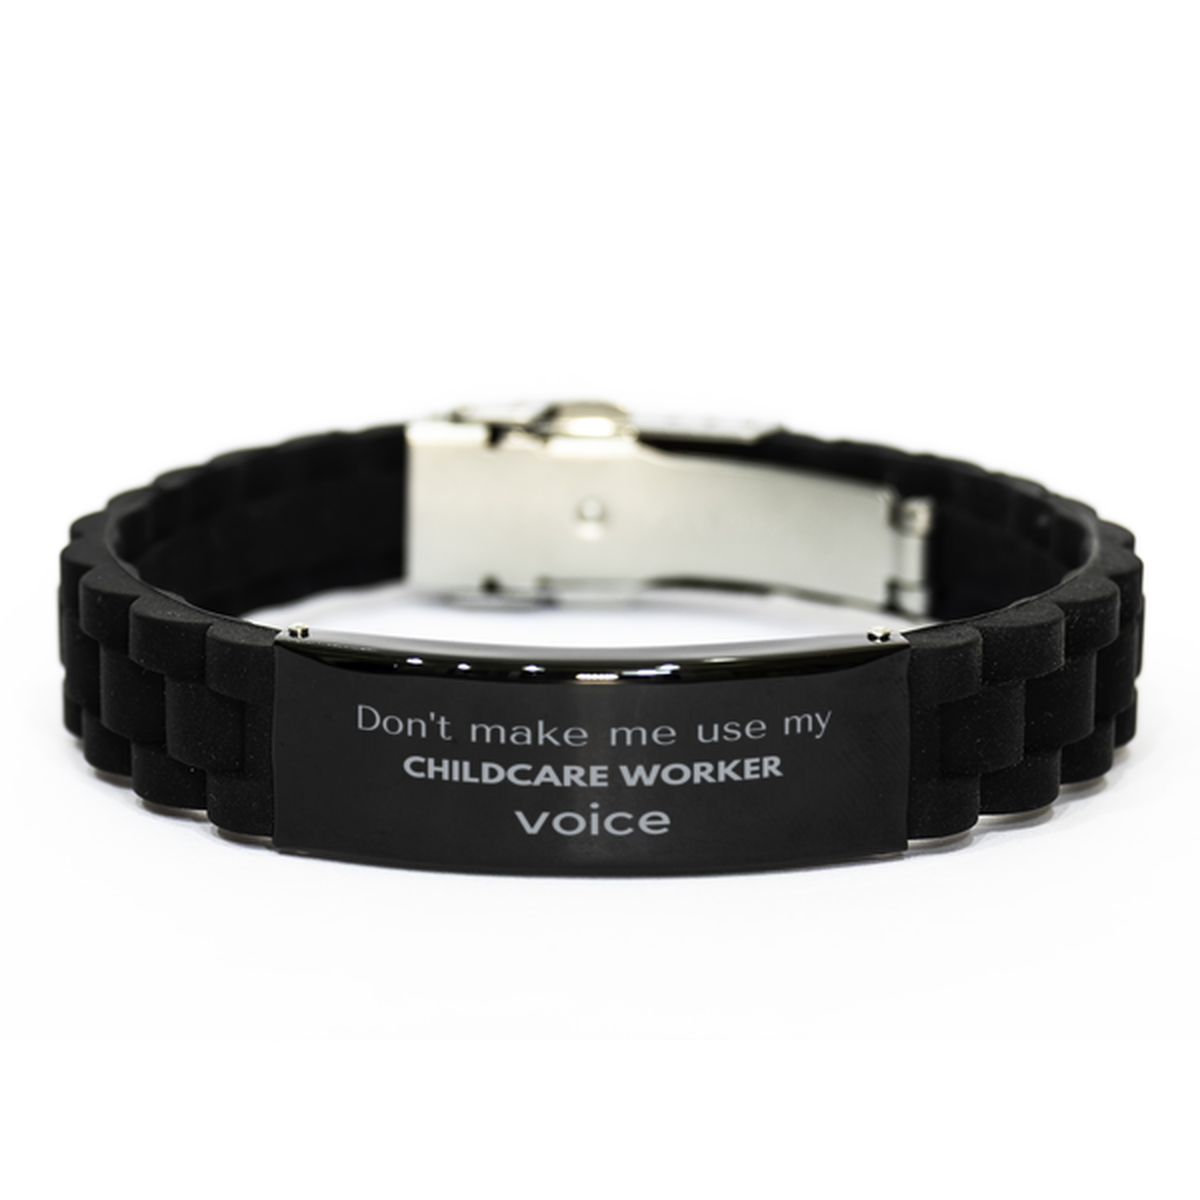 Don't make me use my Childcare Worker voice, Sarcasm Childcare Worker Gifts, Christmas Childcare Worker Black Glidelock Clasp Bracelet Birthday Unique Gifts For Childcare Worker Coworkers, Men, Women, Colleague, Friends